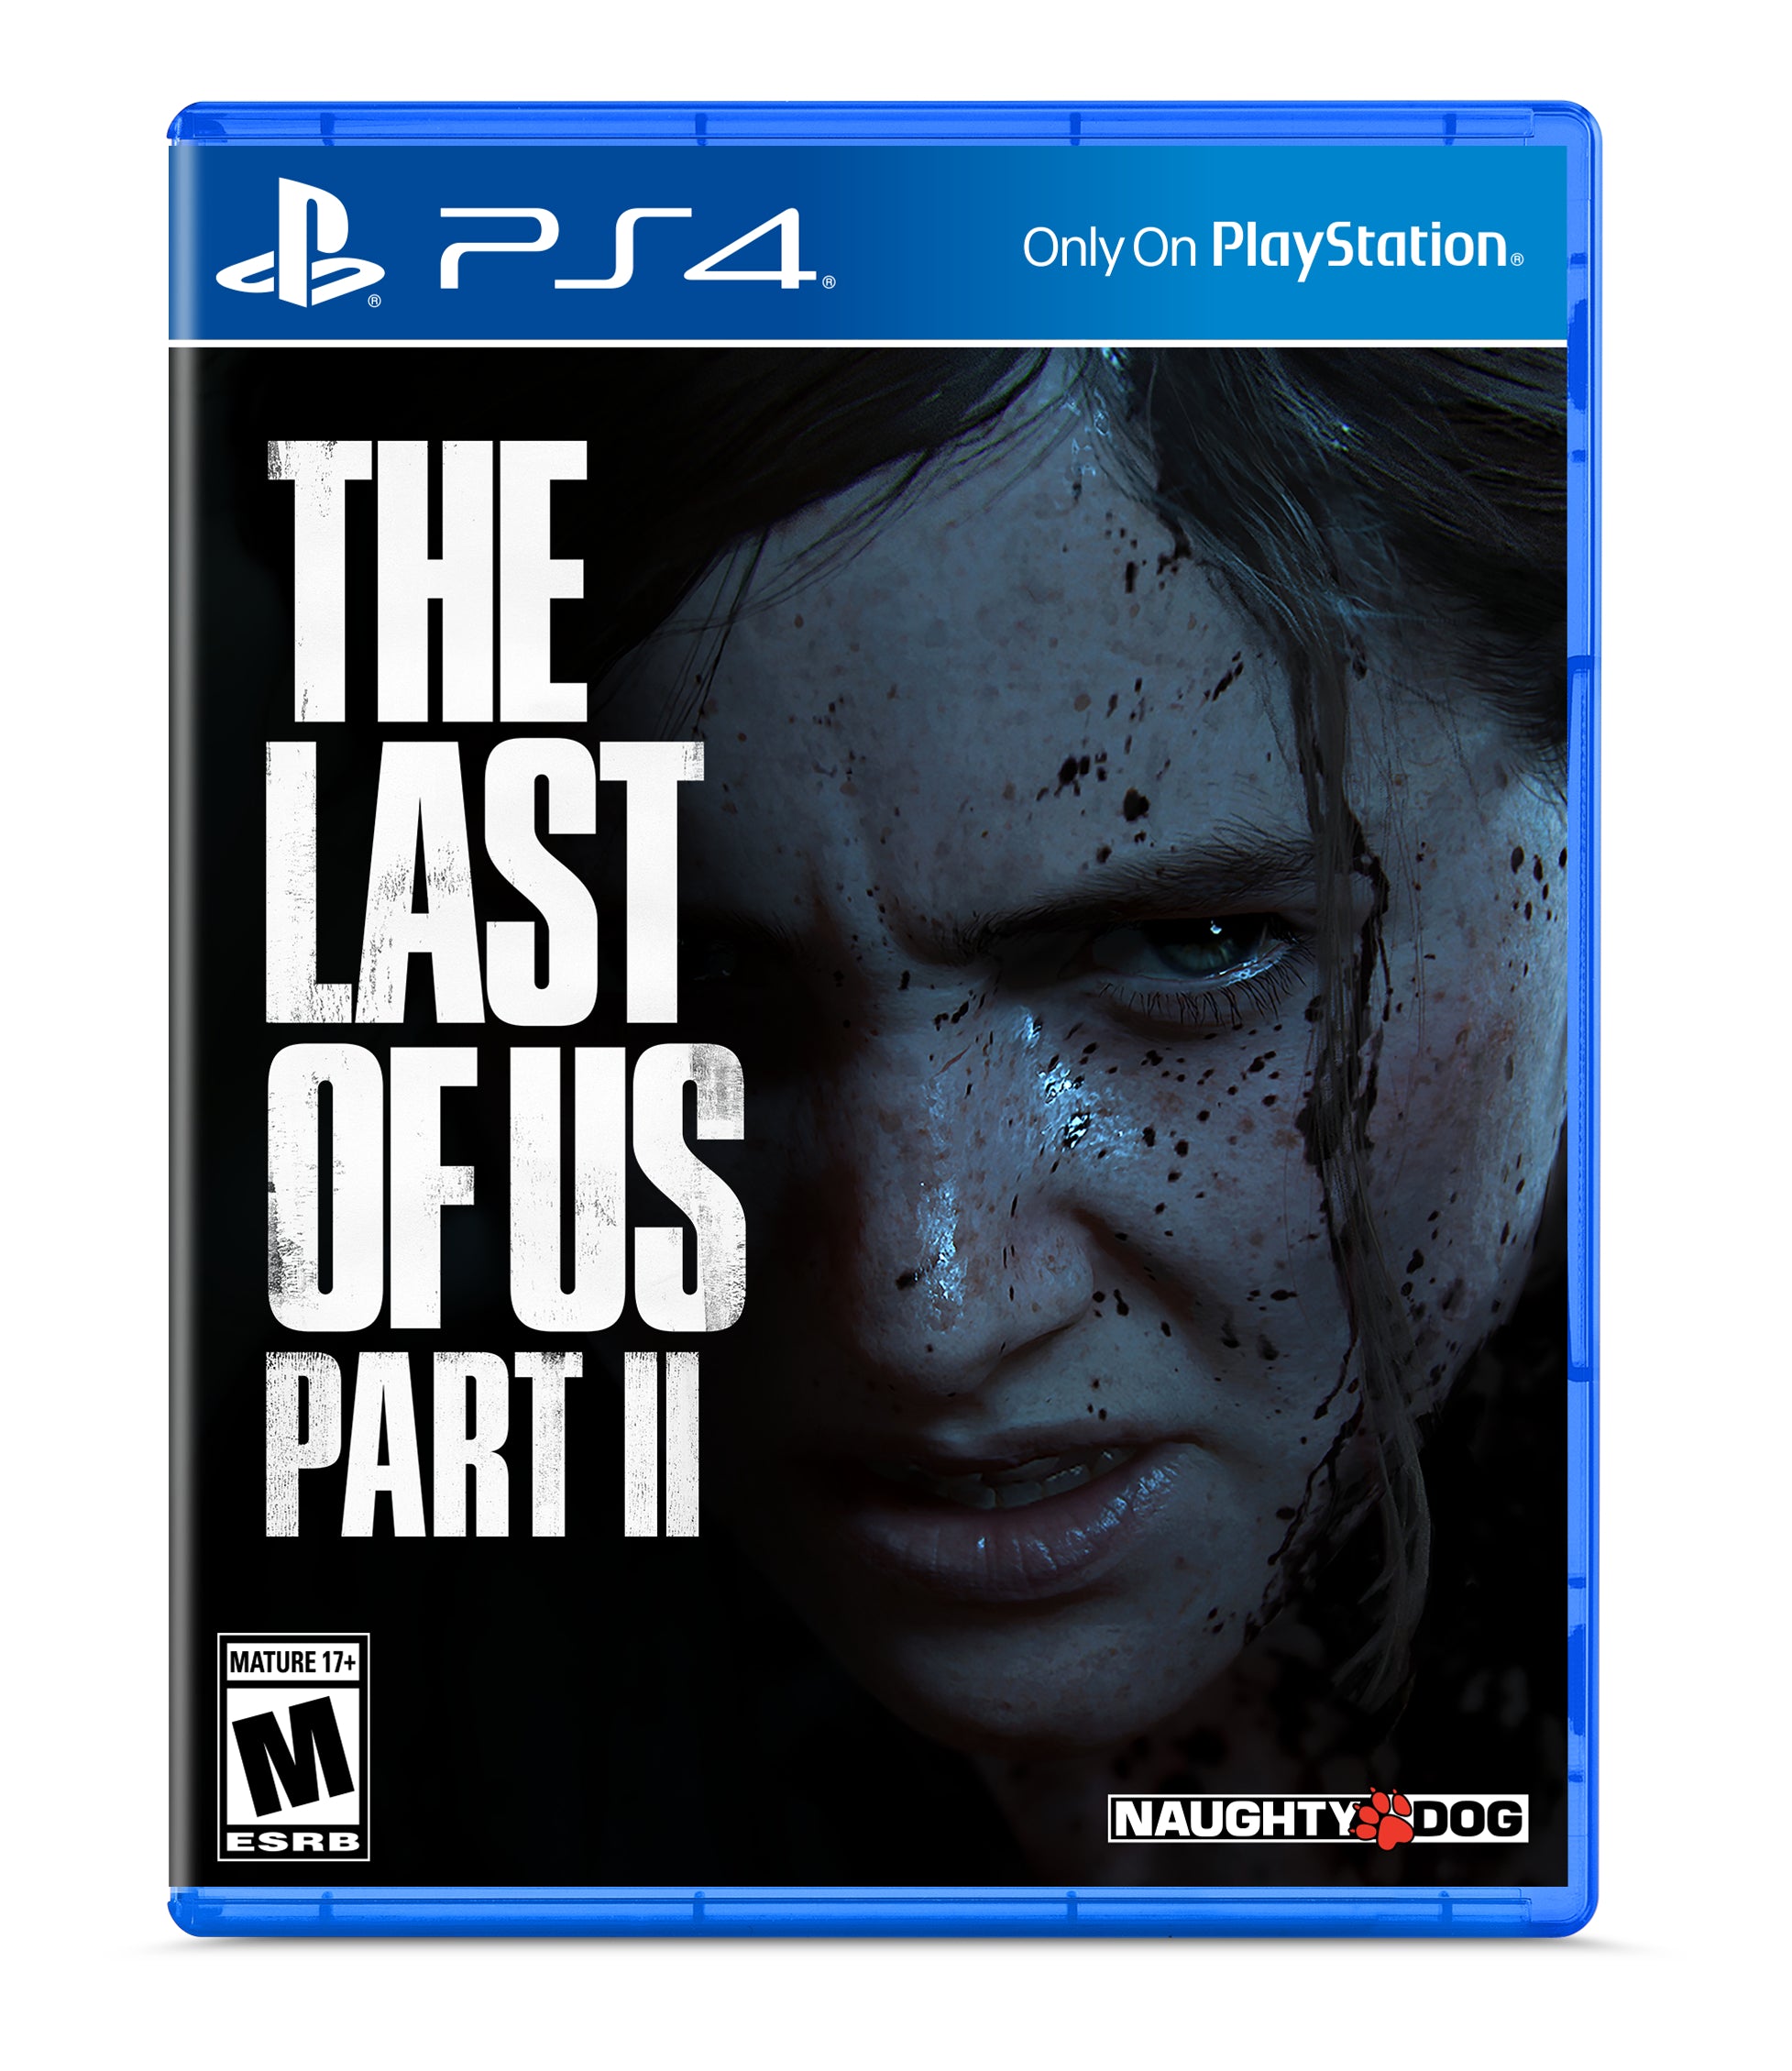 Sony PlayStation 4 Slim The Last of Us Part II Bundle Upgrade 2TB SSD PS4 Gaming Console, Jet Black, with Mytrix High Speed HDMI - 2TB Internal Fast Solid State Drive Enhanced PS4 Console